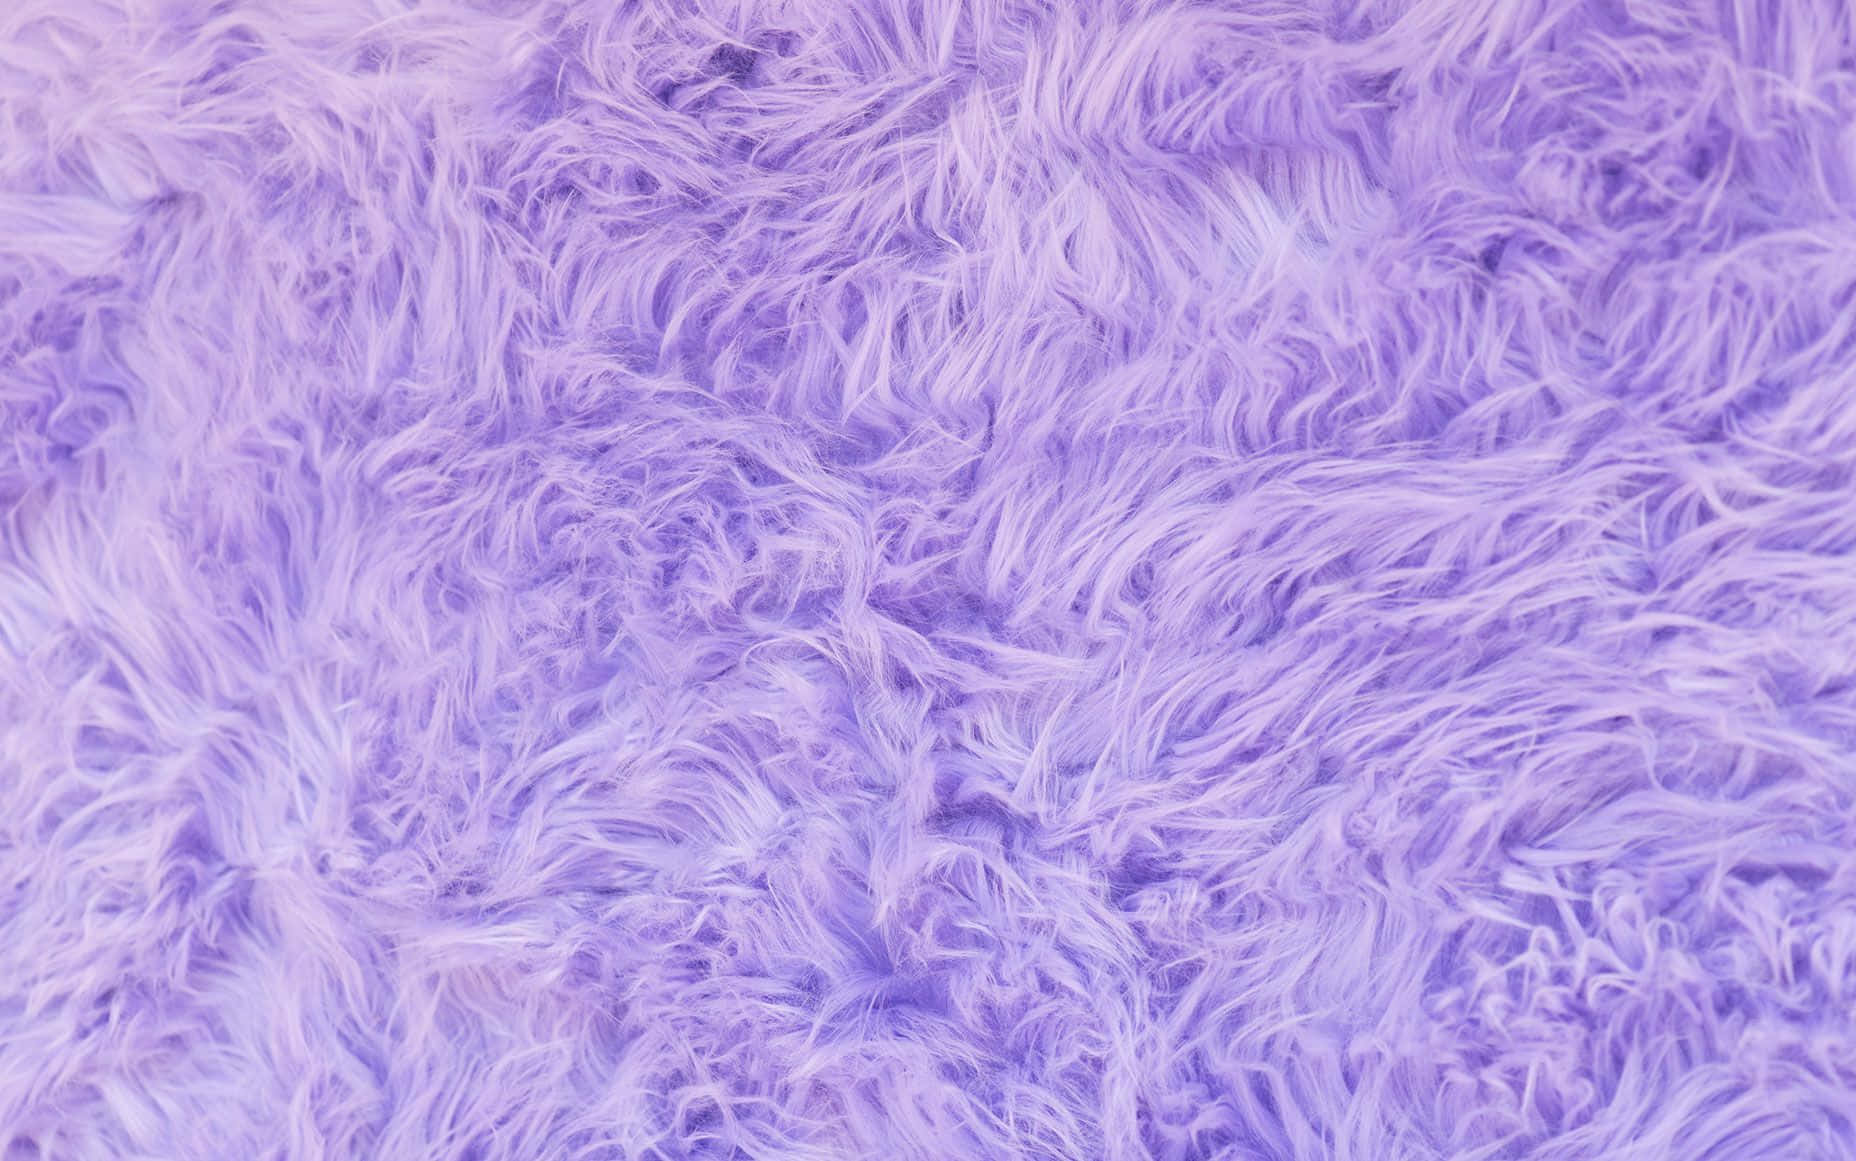 Soft and luxurious, this purple faux fur makes a beautiful accent for your home. Wallpaper